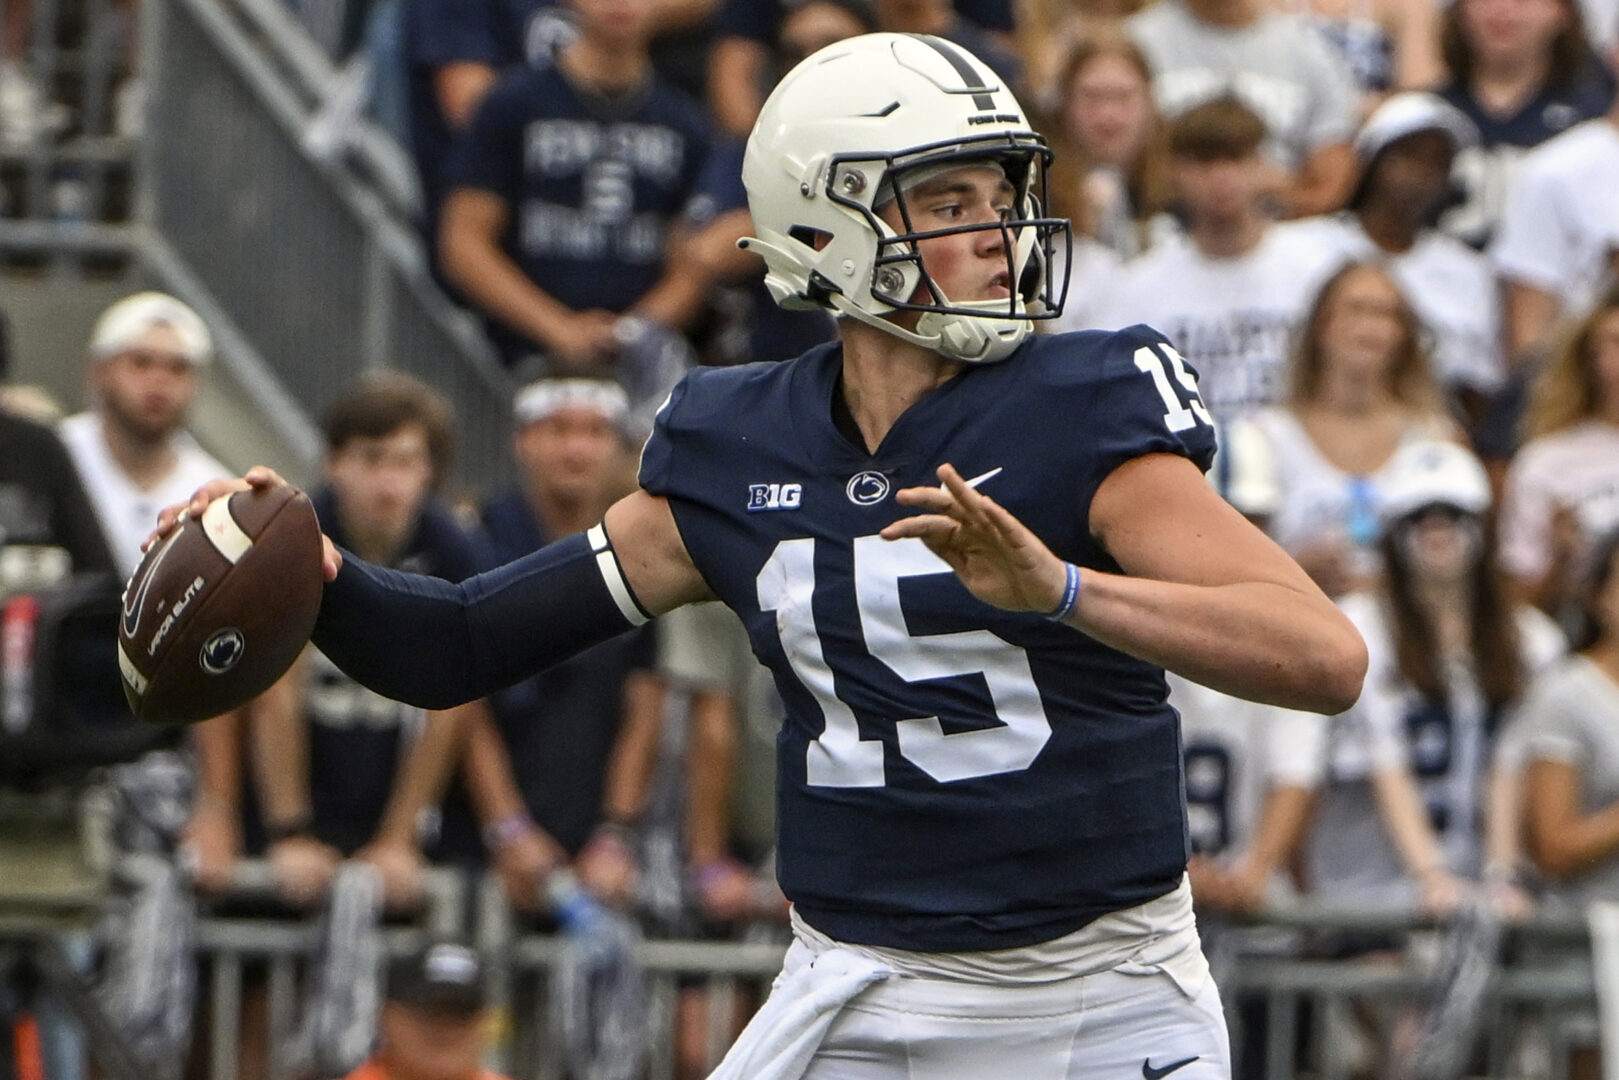 FILE - Penn State quarterback Drew Allar (15) looks to pass against Ohio during the second half of an NCAA college football game, Saturday, Sept. 10, 2022, in State College, Pa. Penn State opens their season at home against West Virginia on Sept. 2. (AP Photo/Barry Reeger, File)